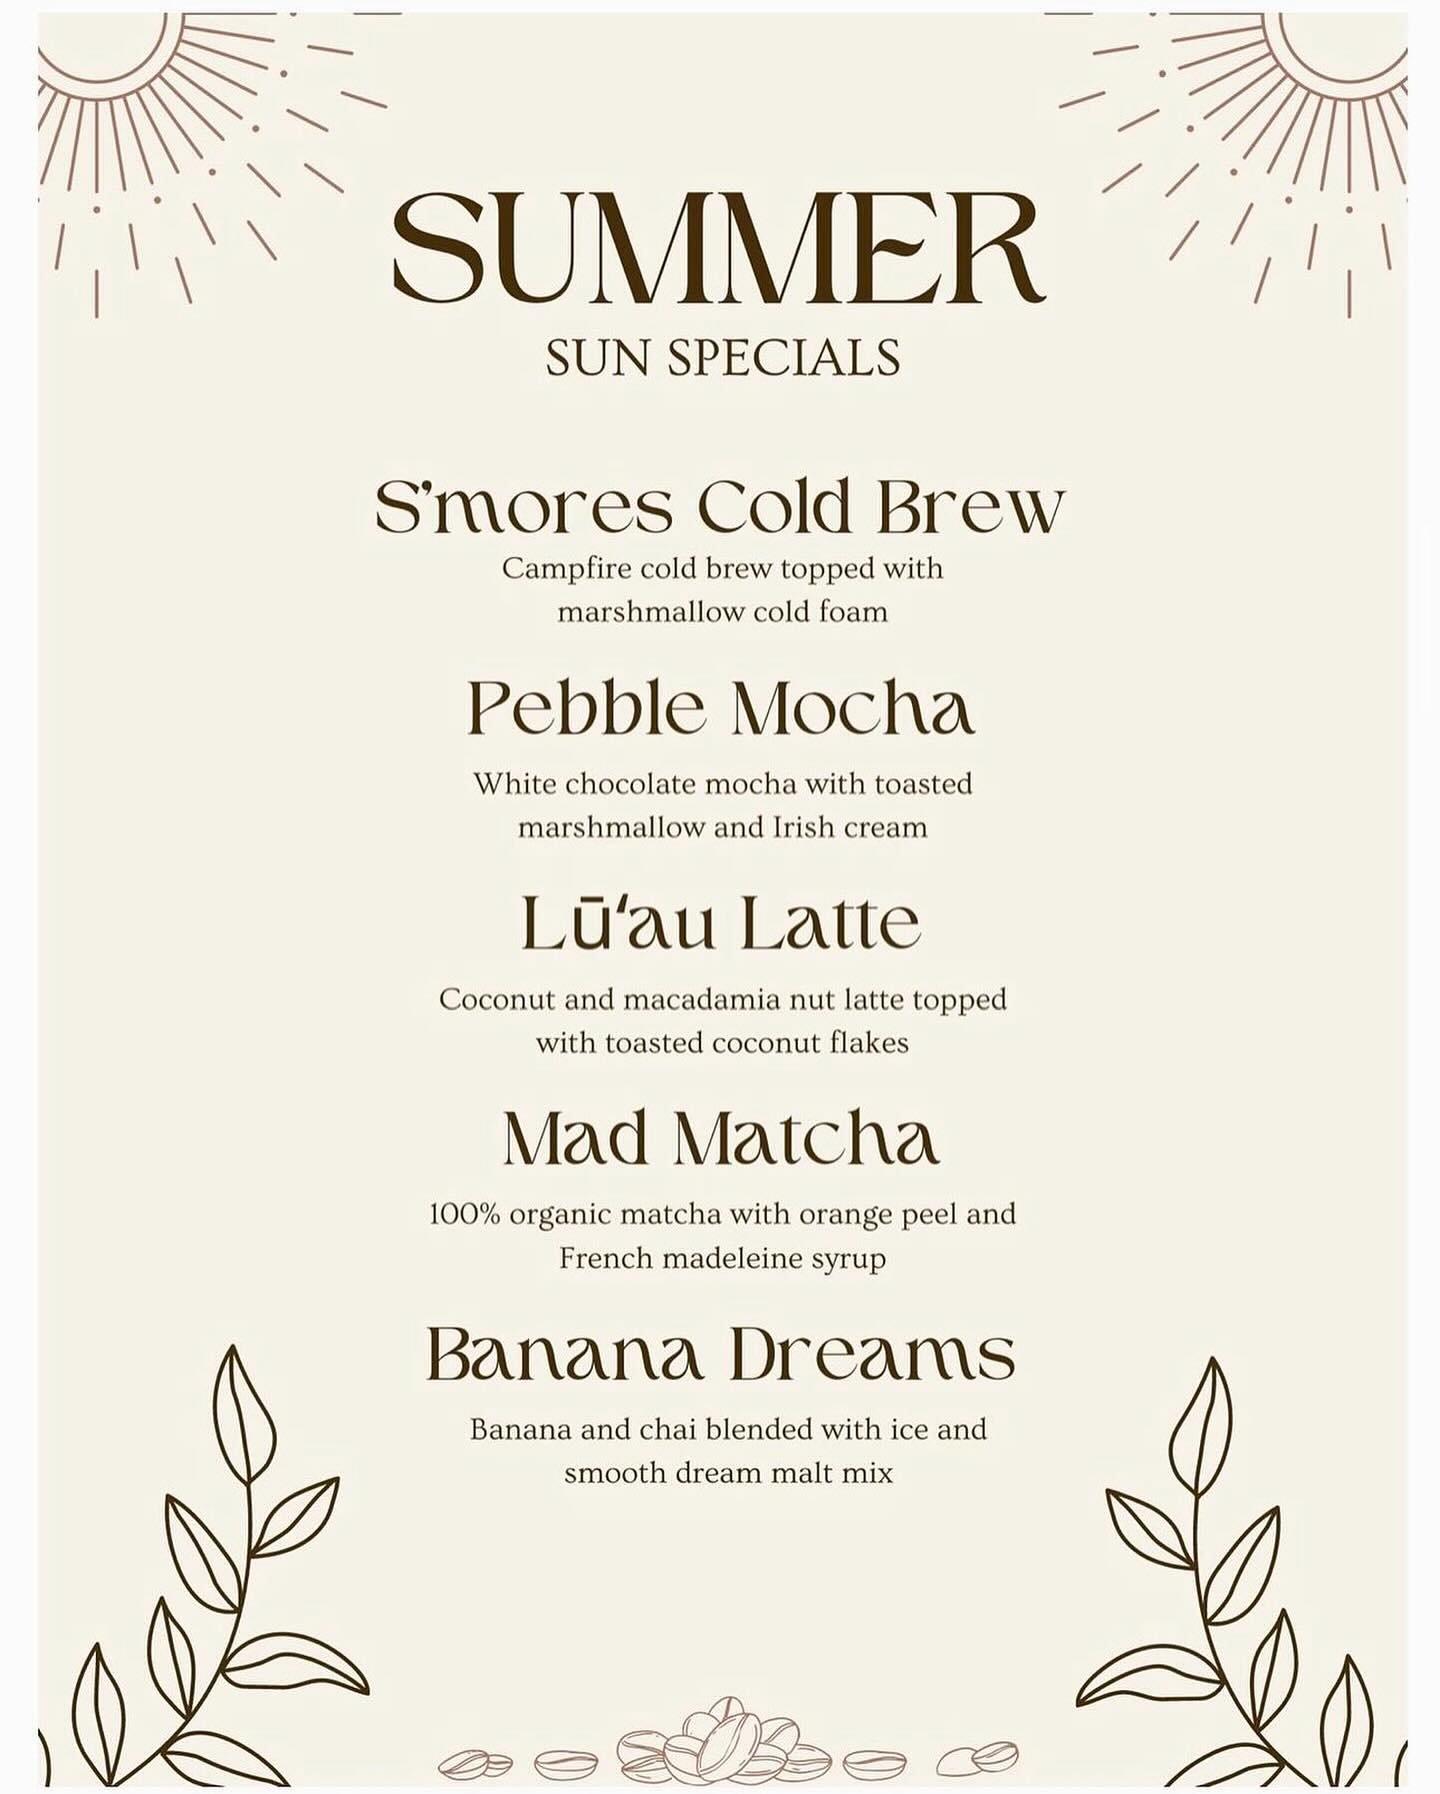 Enjoy the season with our Summer Sun Specials! ☀️ 

🔥 S&rsquo;mores Cold Brew
Campfire cold brew topped with marshmallow cold foam 

☕️ Pebble Mocha
White chocolate mocha with toasted marshmallow and Irish cream 

🥥 Luau Latte
Coconut and macadamia